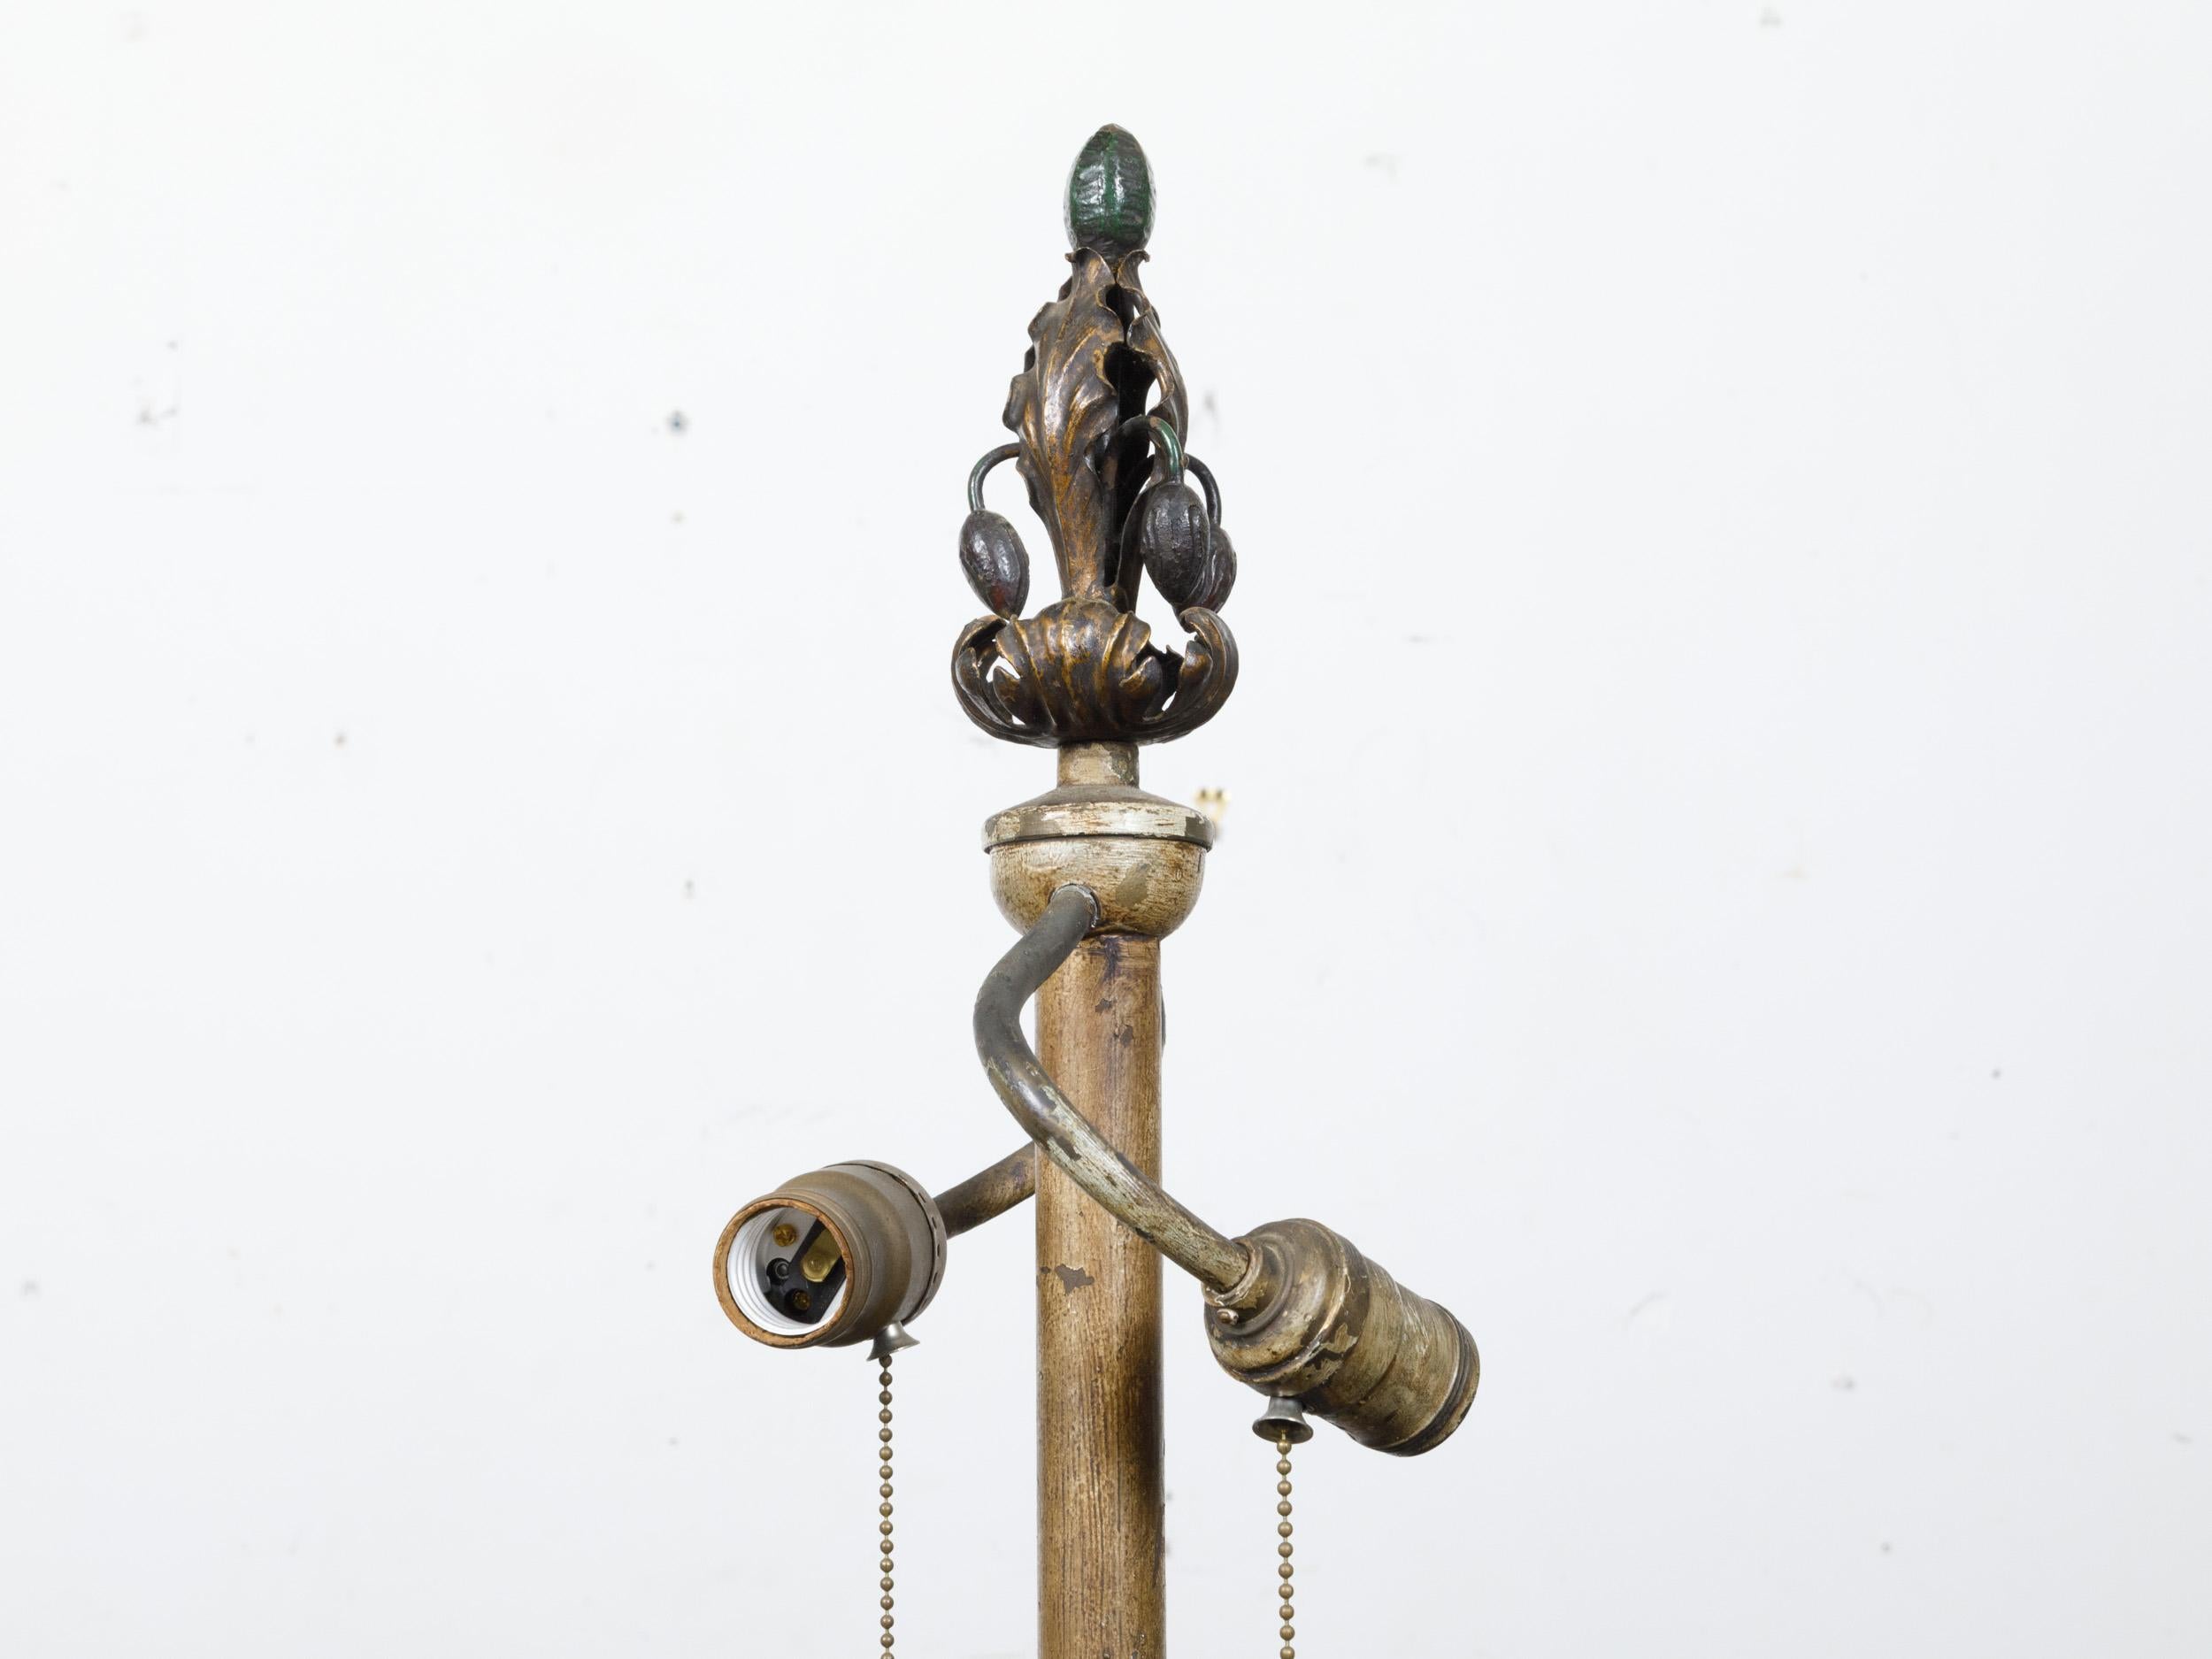 French Steel and Brass 1930s Floor Lamp with Scrolling Legs and Foliage Motifs For Sale 6